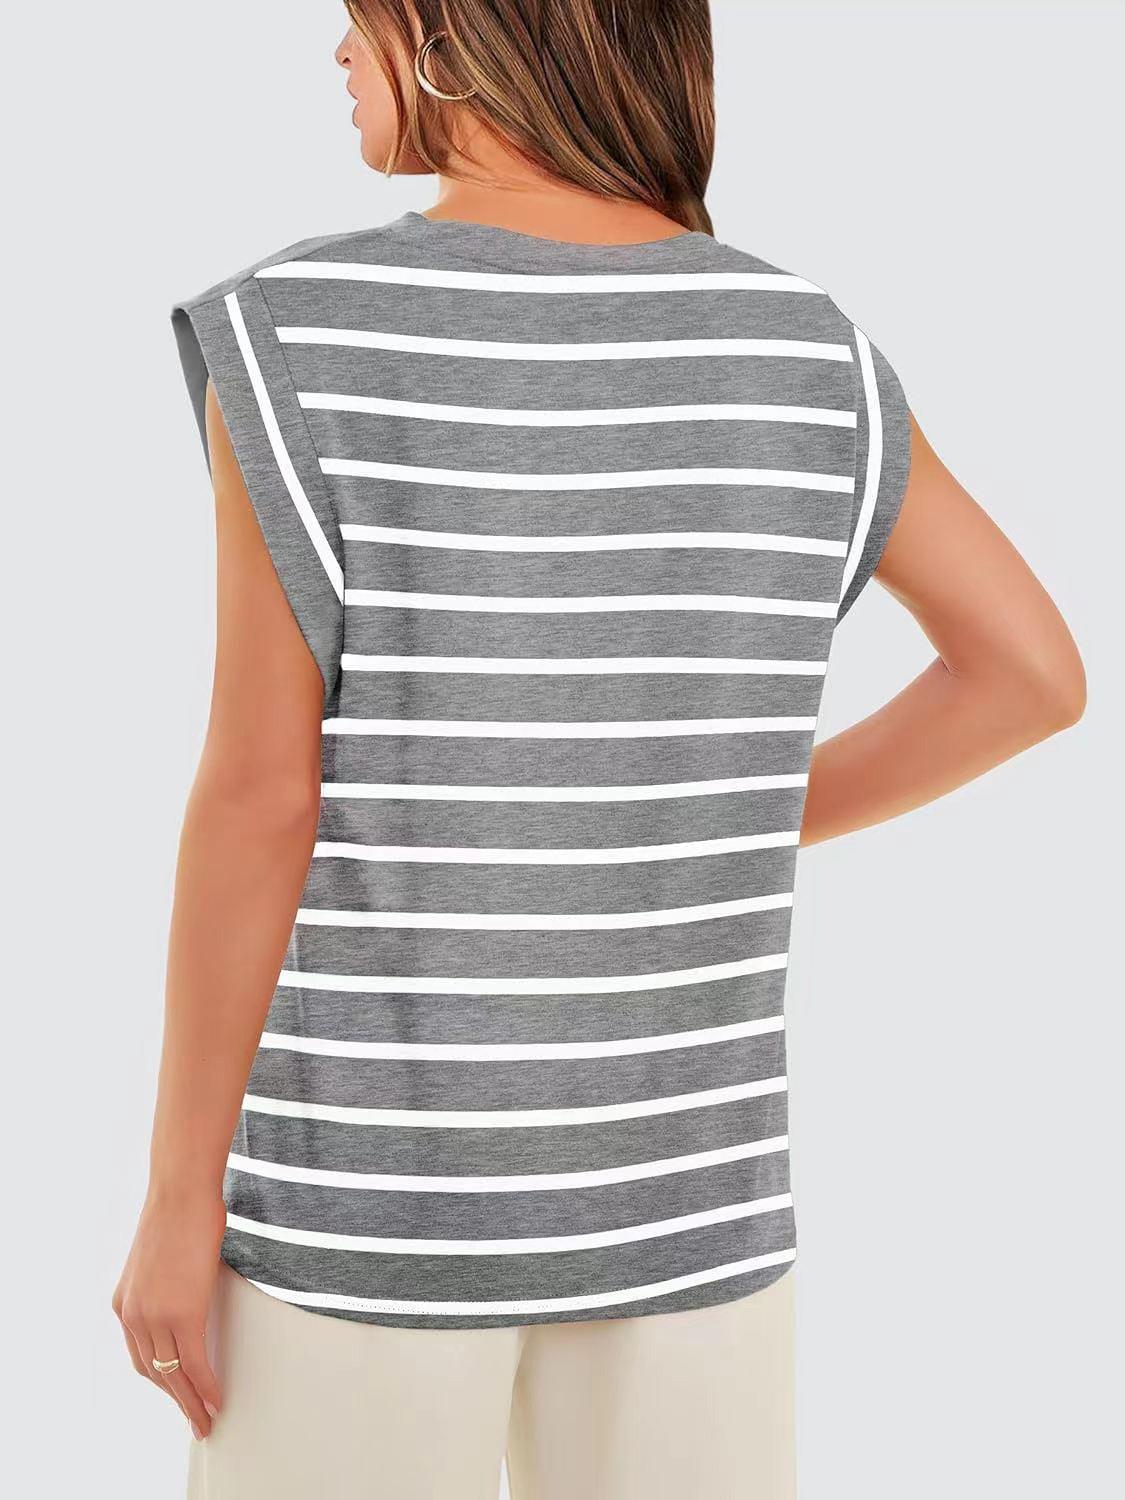 Striped Cap Sleeve Top in 5 Colors - Olive Ave